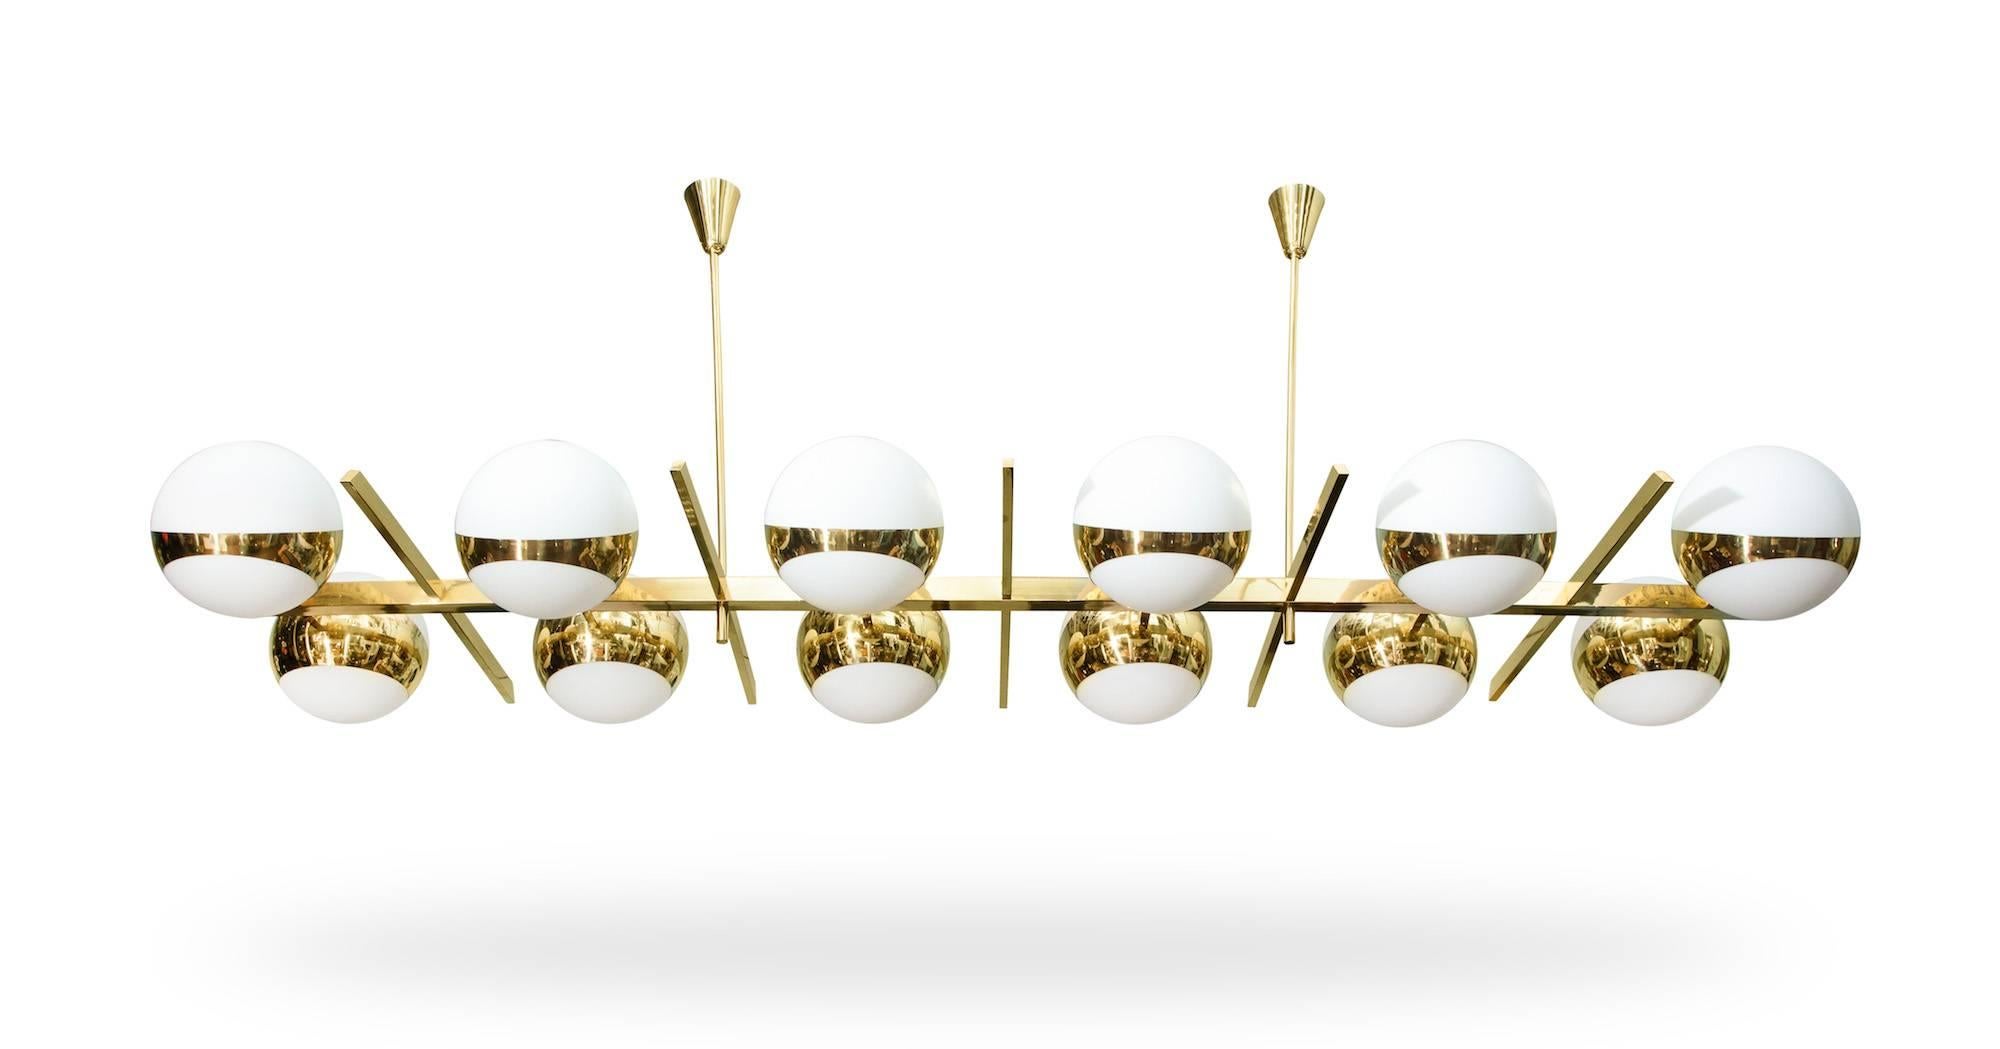 Monumental twelve-light chandelier by Fedele Papagni.
Large-scale hanging light of polished brass with frosted-glass globes. Twelve standard Edison sockets and new wiring. Made exclusively for Donzella.